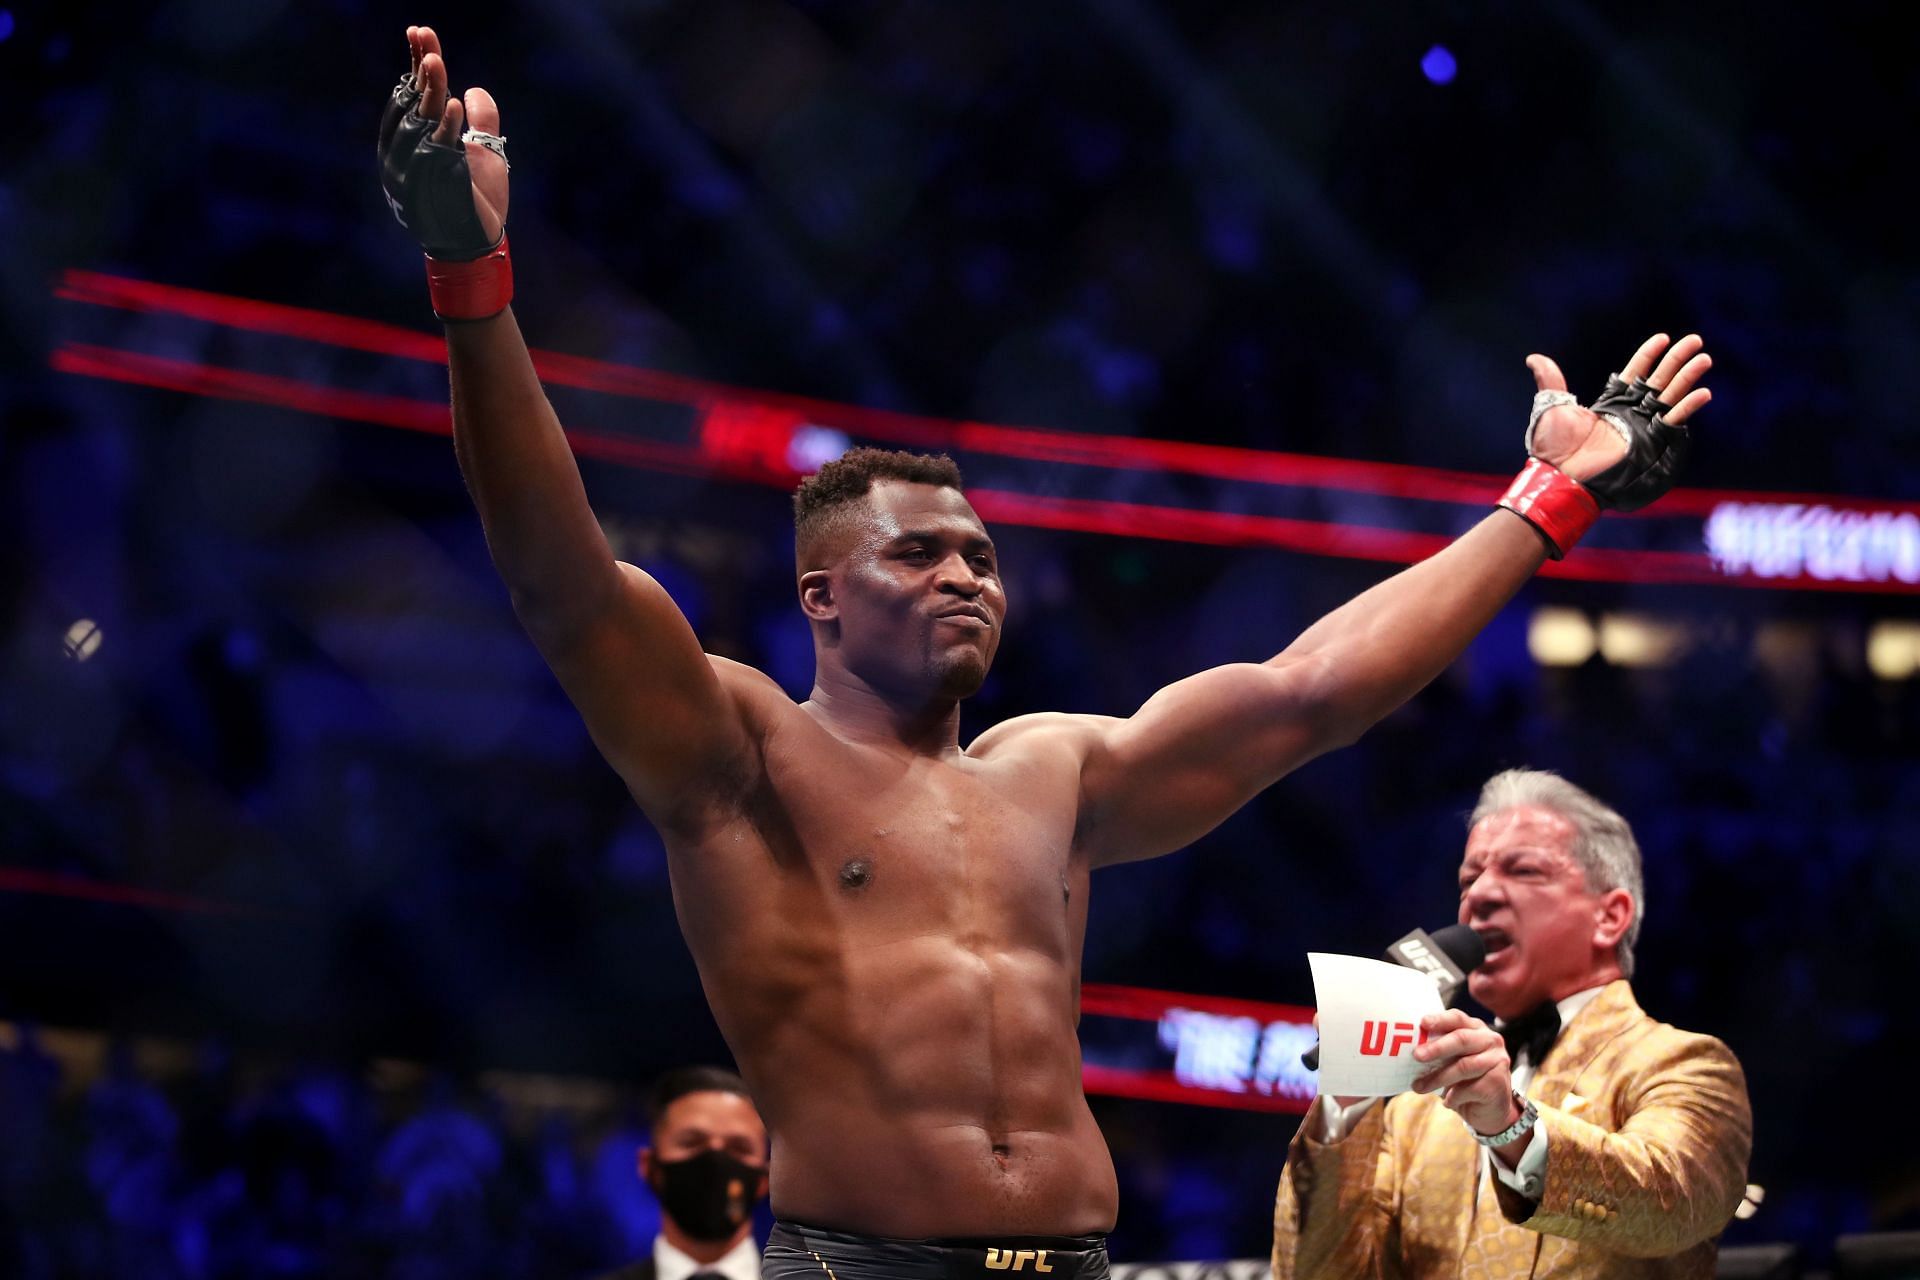 A fight between Francis Ngannou and Jon Jones seems unlikely to happen in the near future